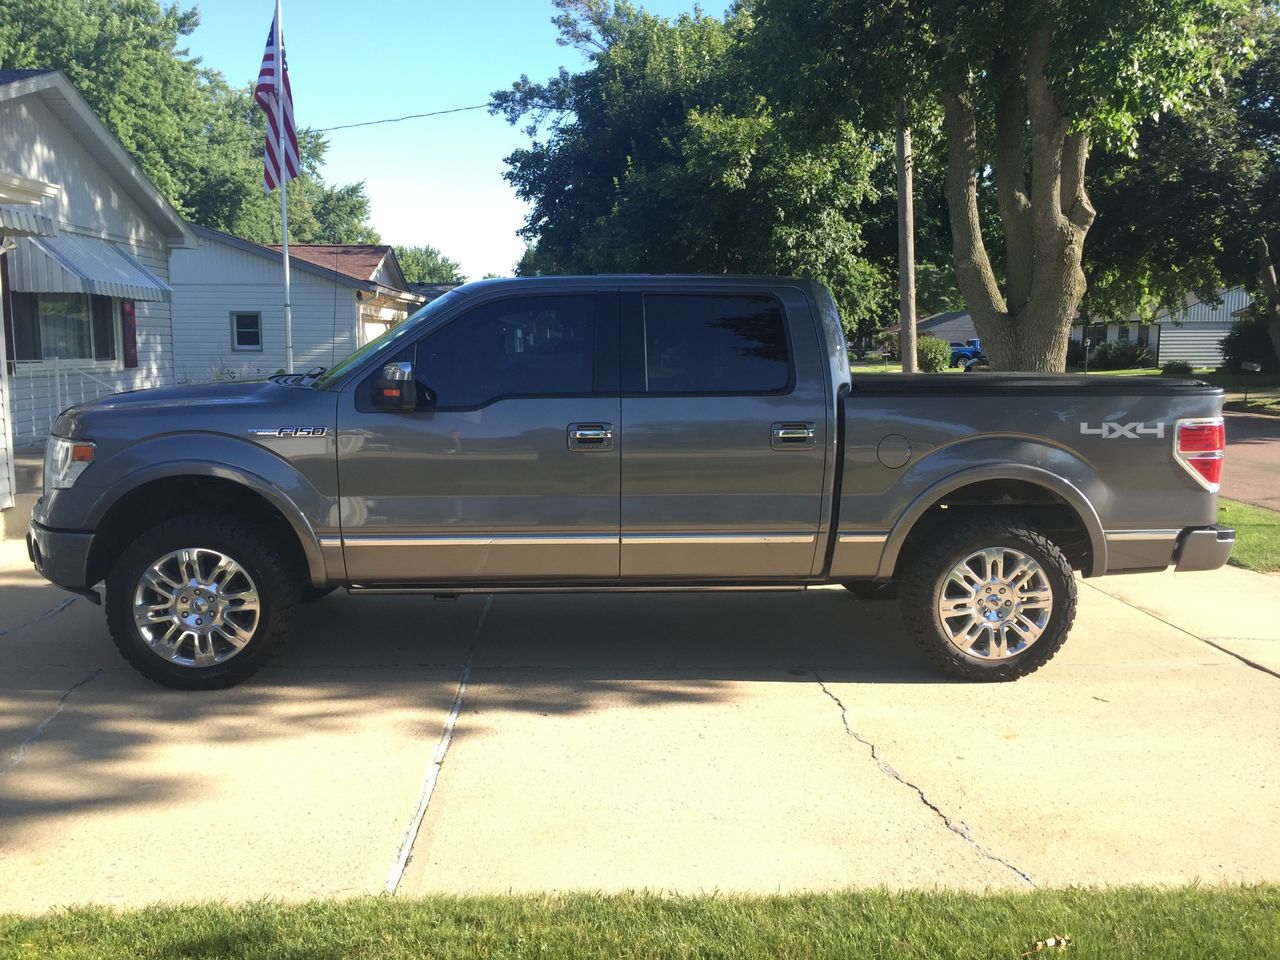 2013 Ford F-150 Platinum | Sioux Falls, SD, Sterling Gray Metallic (Gray), 4x4